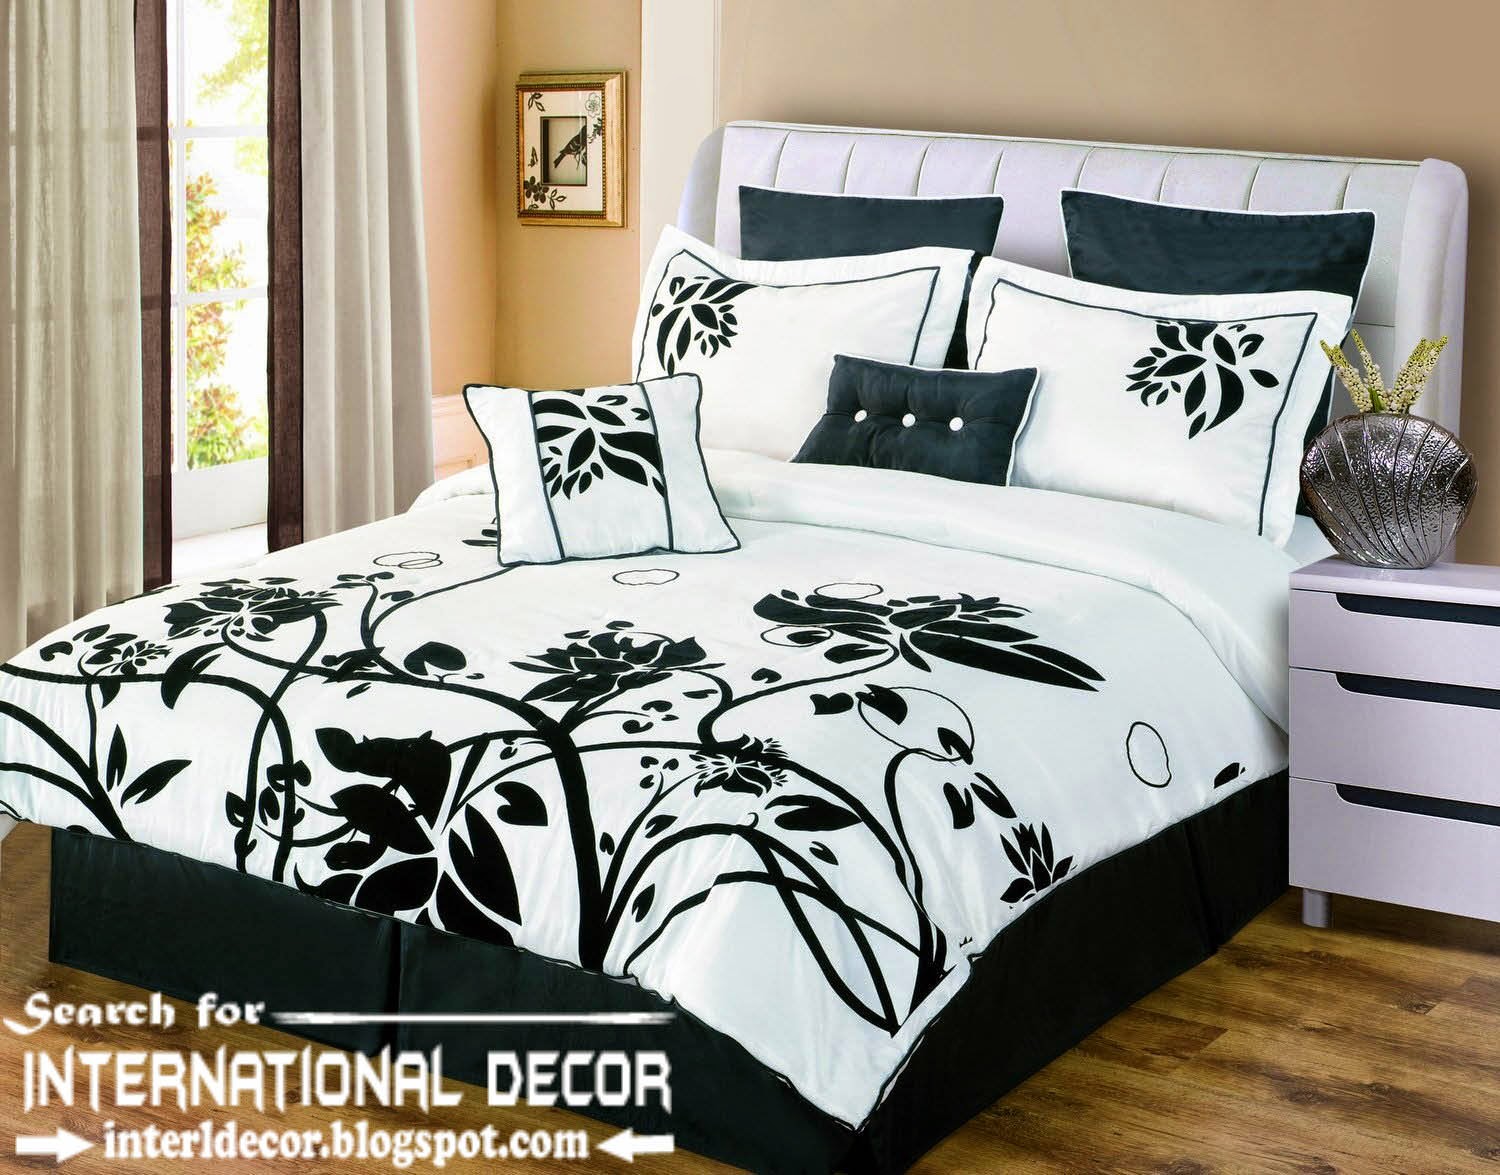 ... , Italian bedding sets, black and white bedspreads and bedding sets